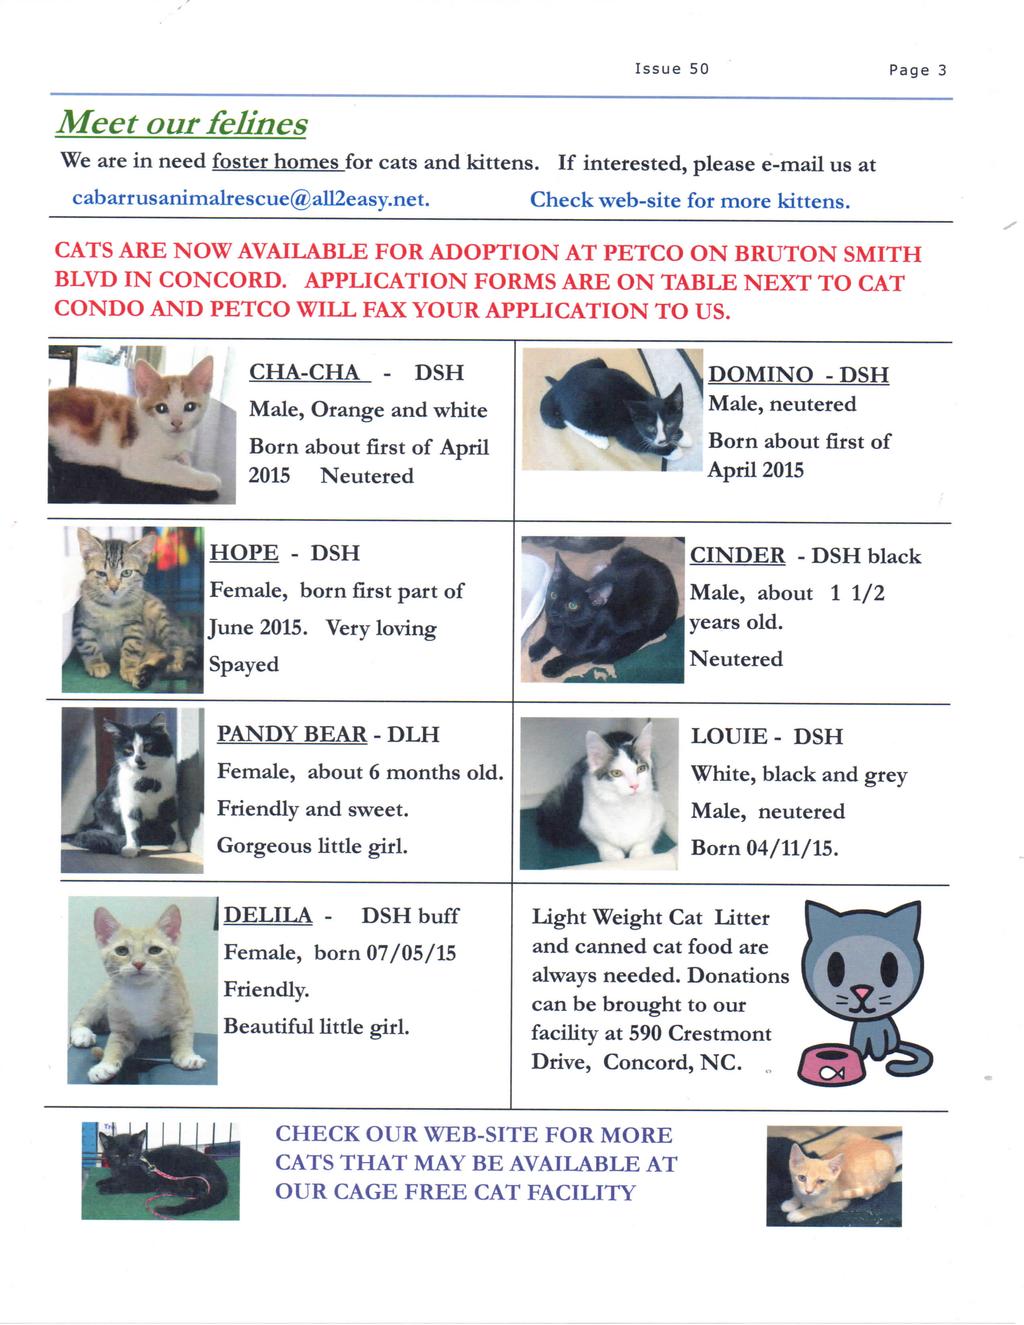 Meet our felines Issue 50 Page 3 We are in need foster homes for cats and kittens. If interested, please e-mail us at cabarrusanimalrescue@all2easy.net. Check web-site for more kittens.